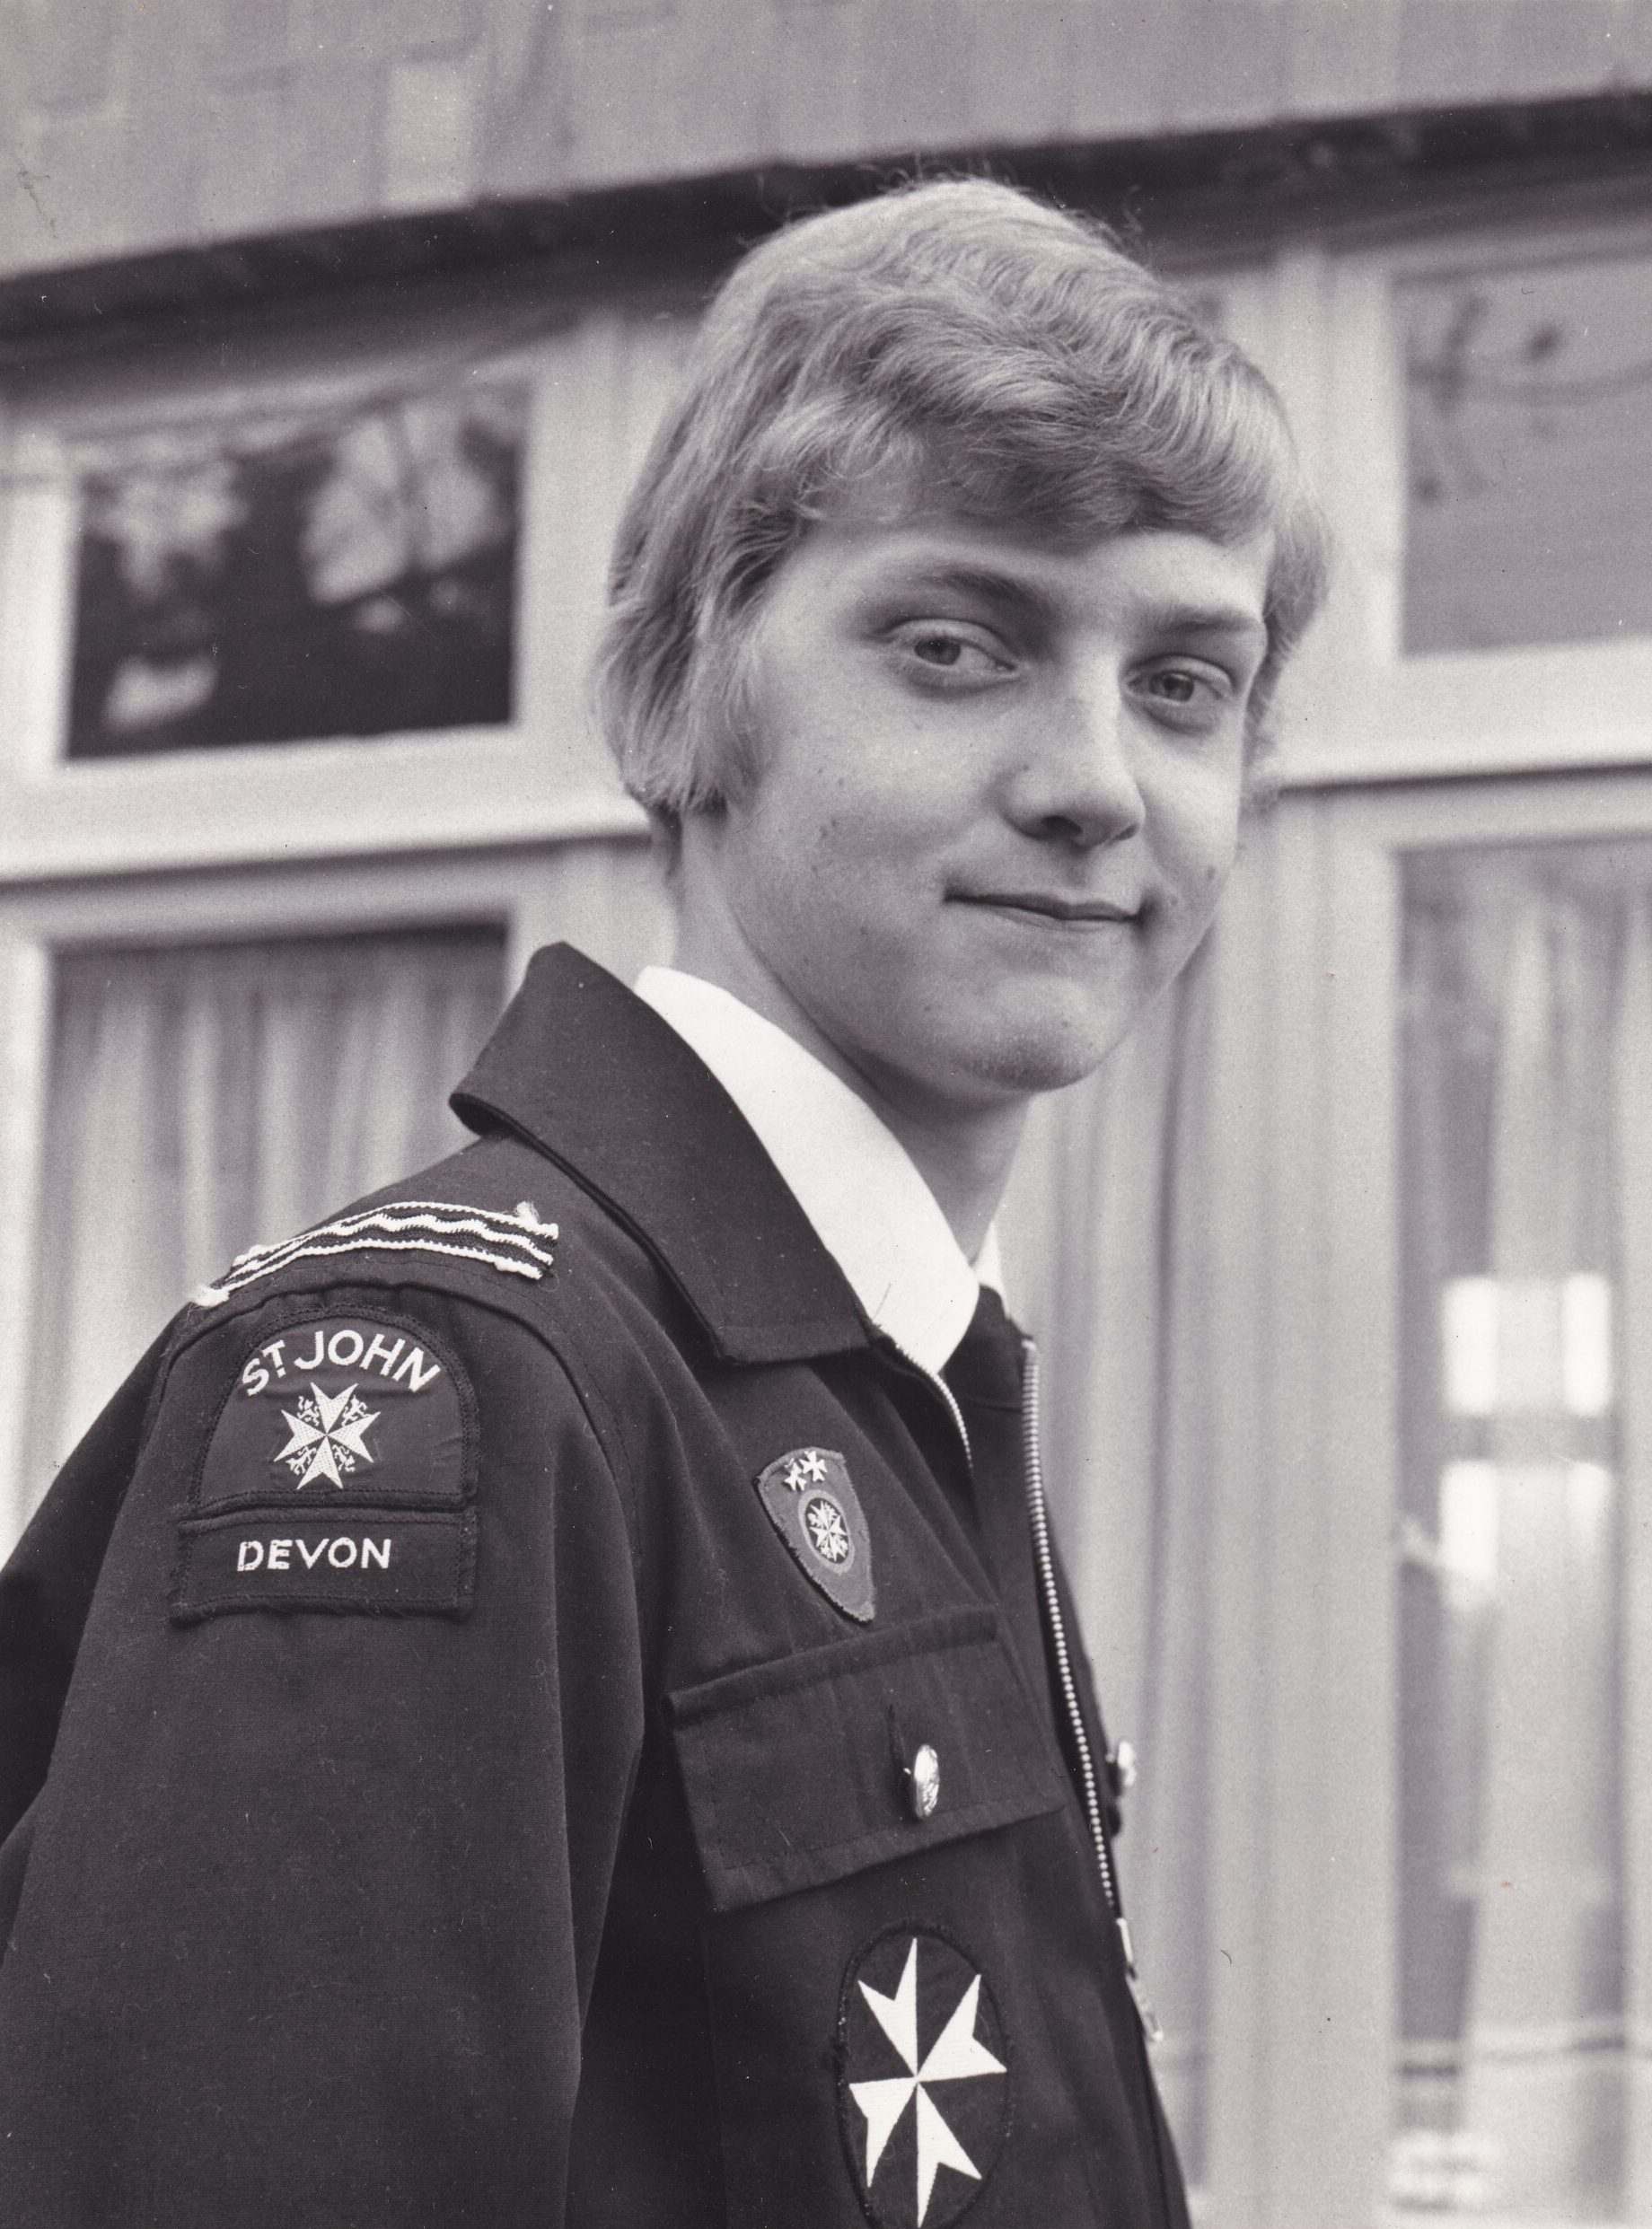 Black and white photograph of a boy wearing a black uniform and looking to the camera over his shoulder. On the sleeve of his jacket are badges that read St John Devon. In the backgrouynd are windows of a house.